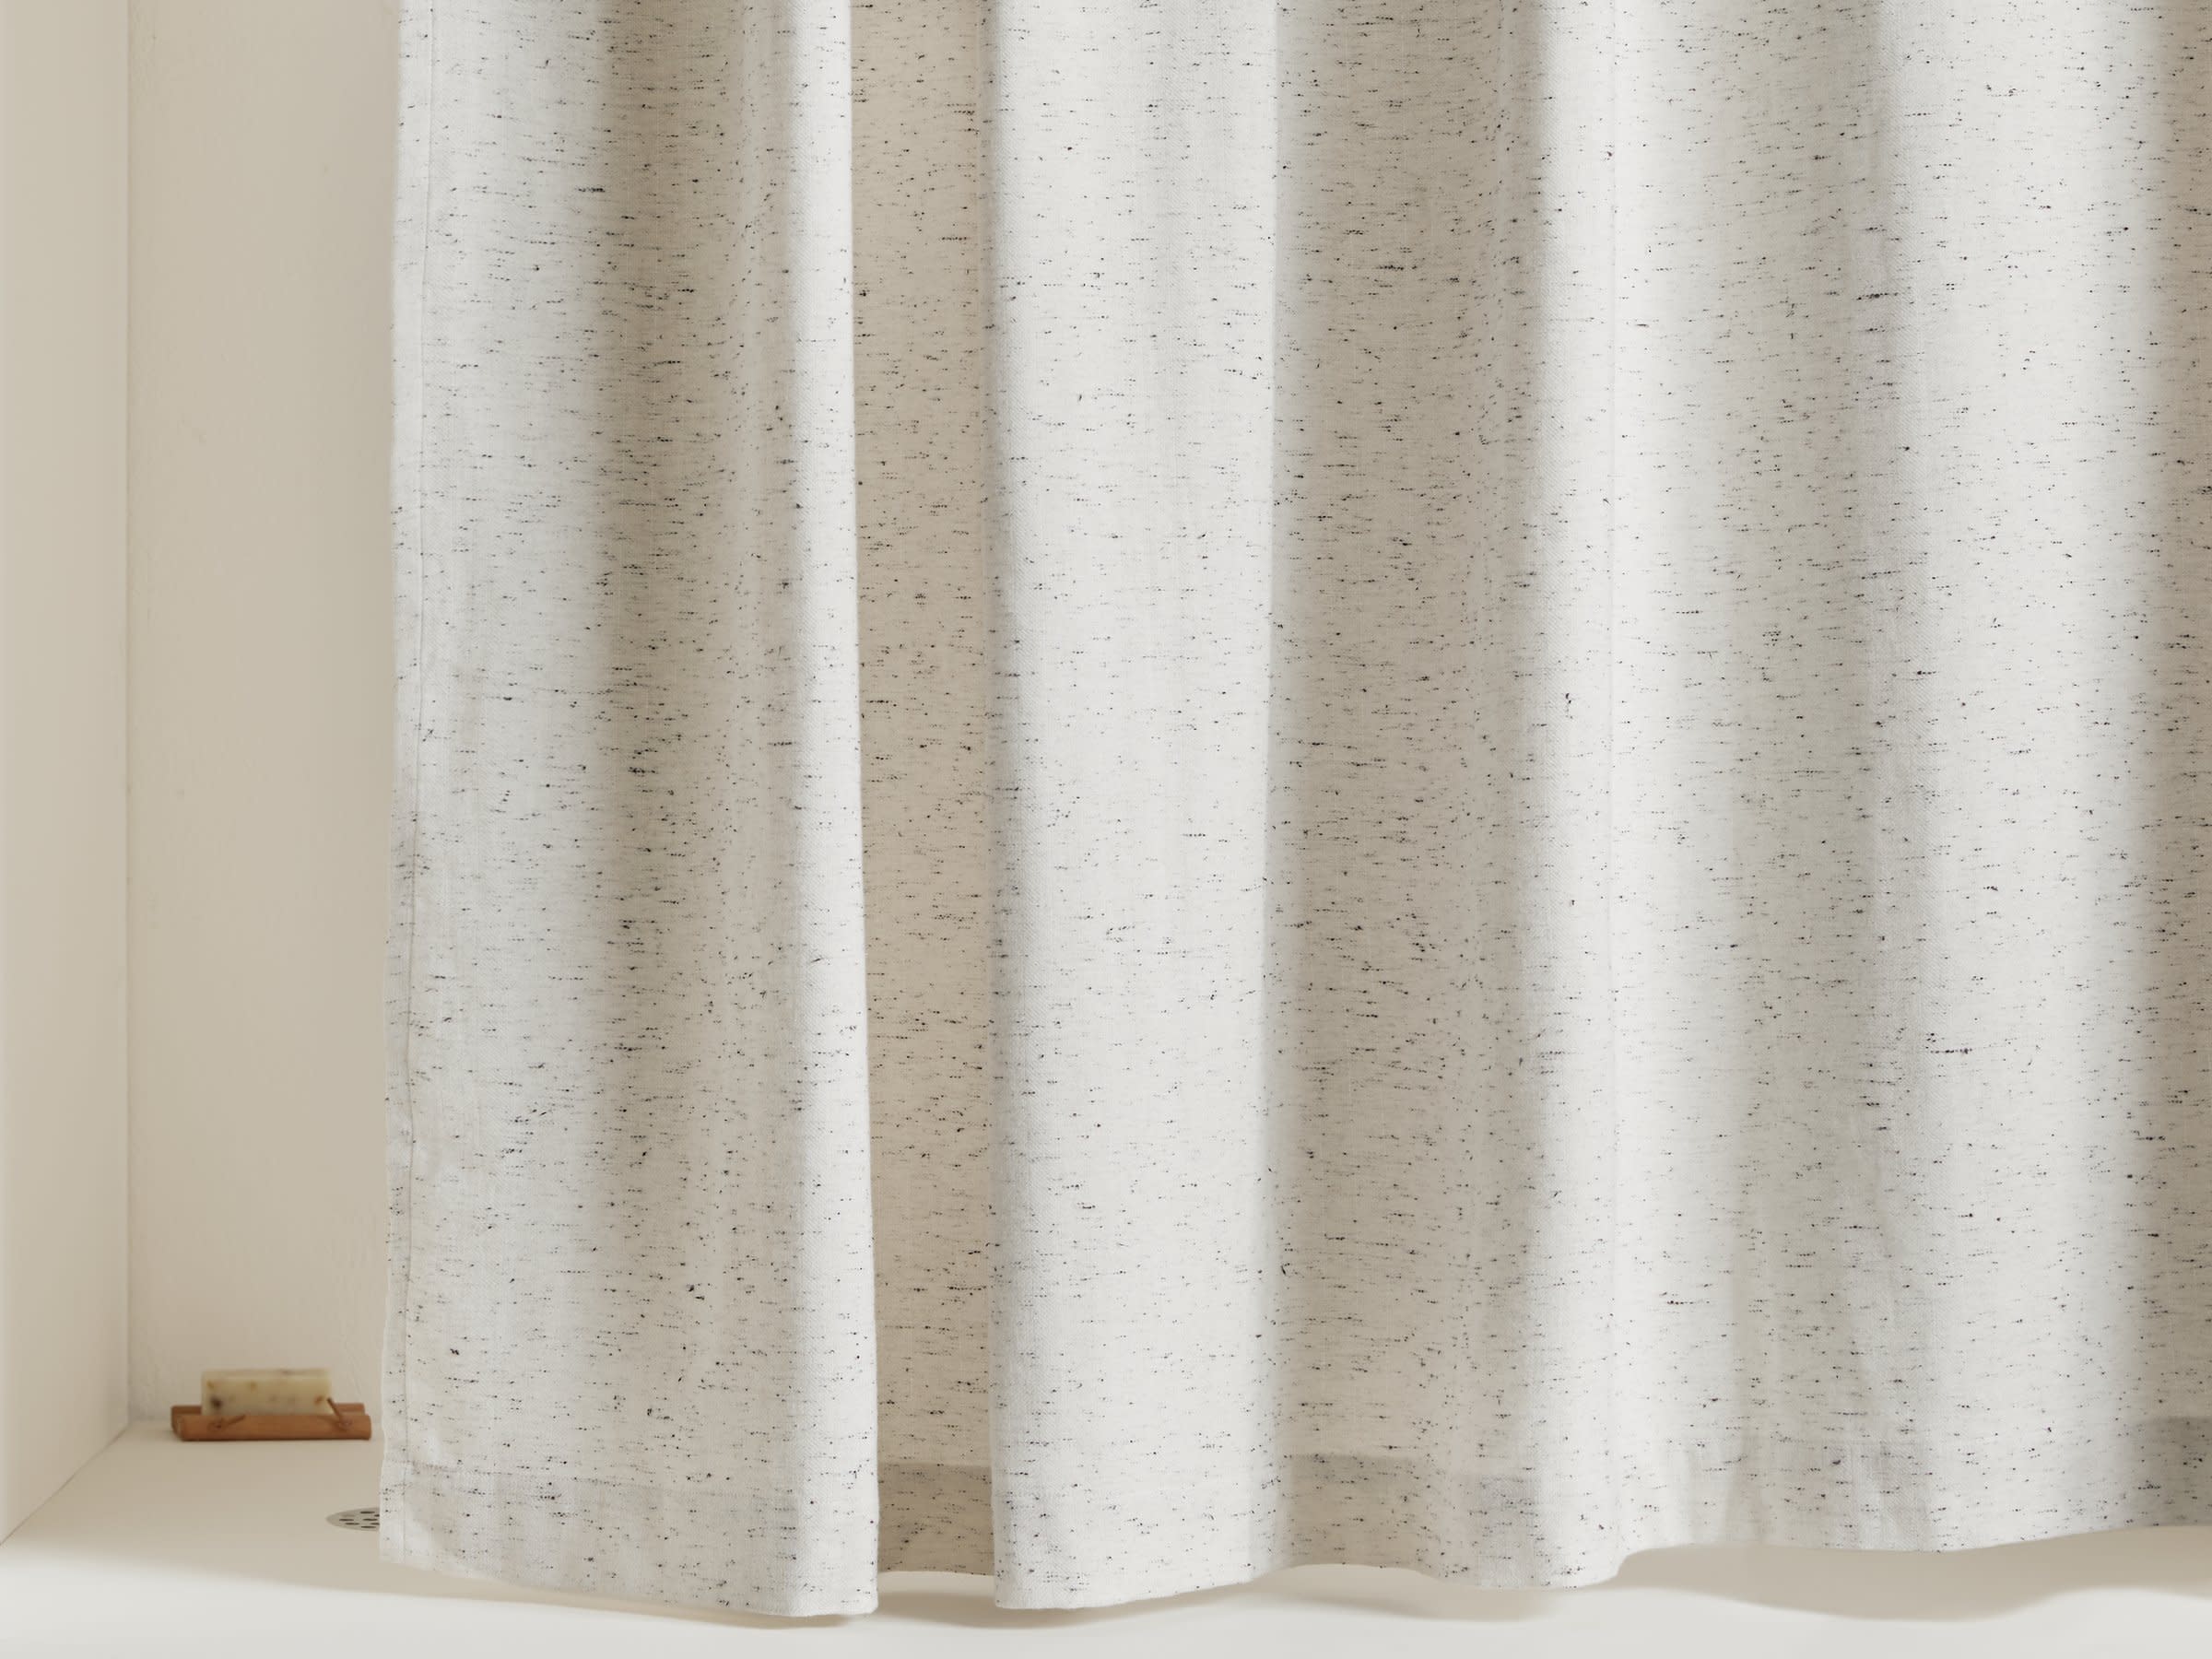 Speckled Shower Curtain Shown In A Room